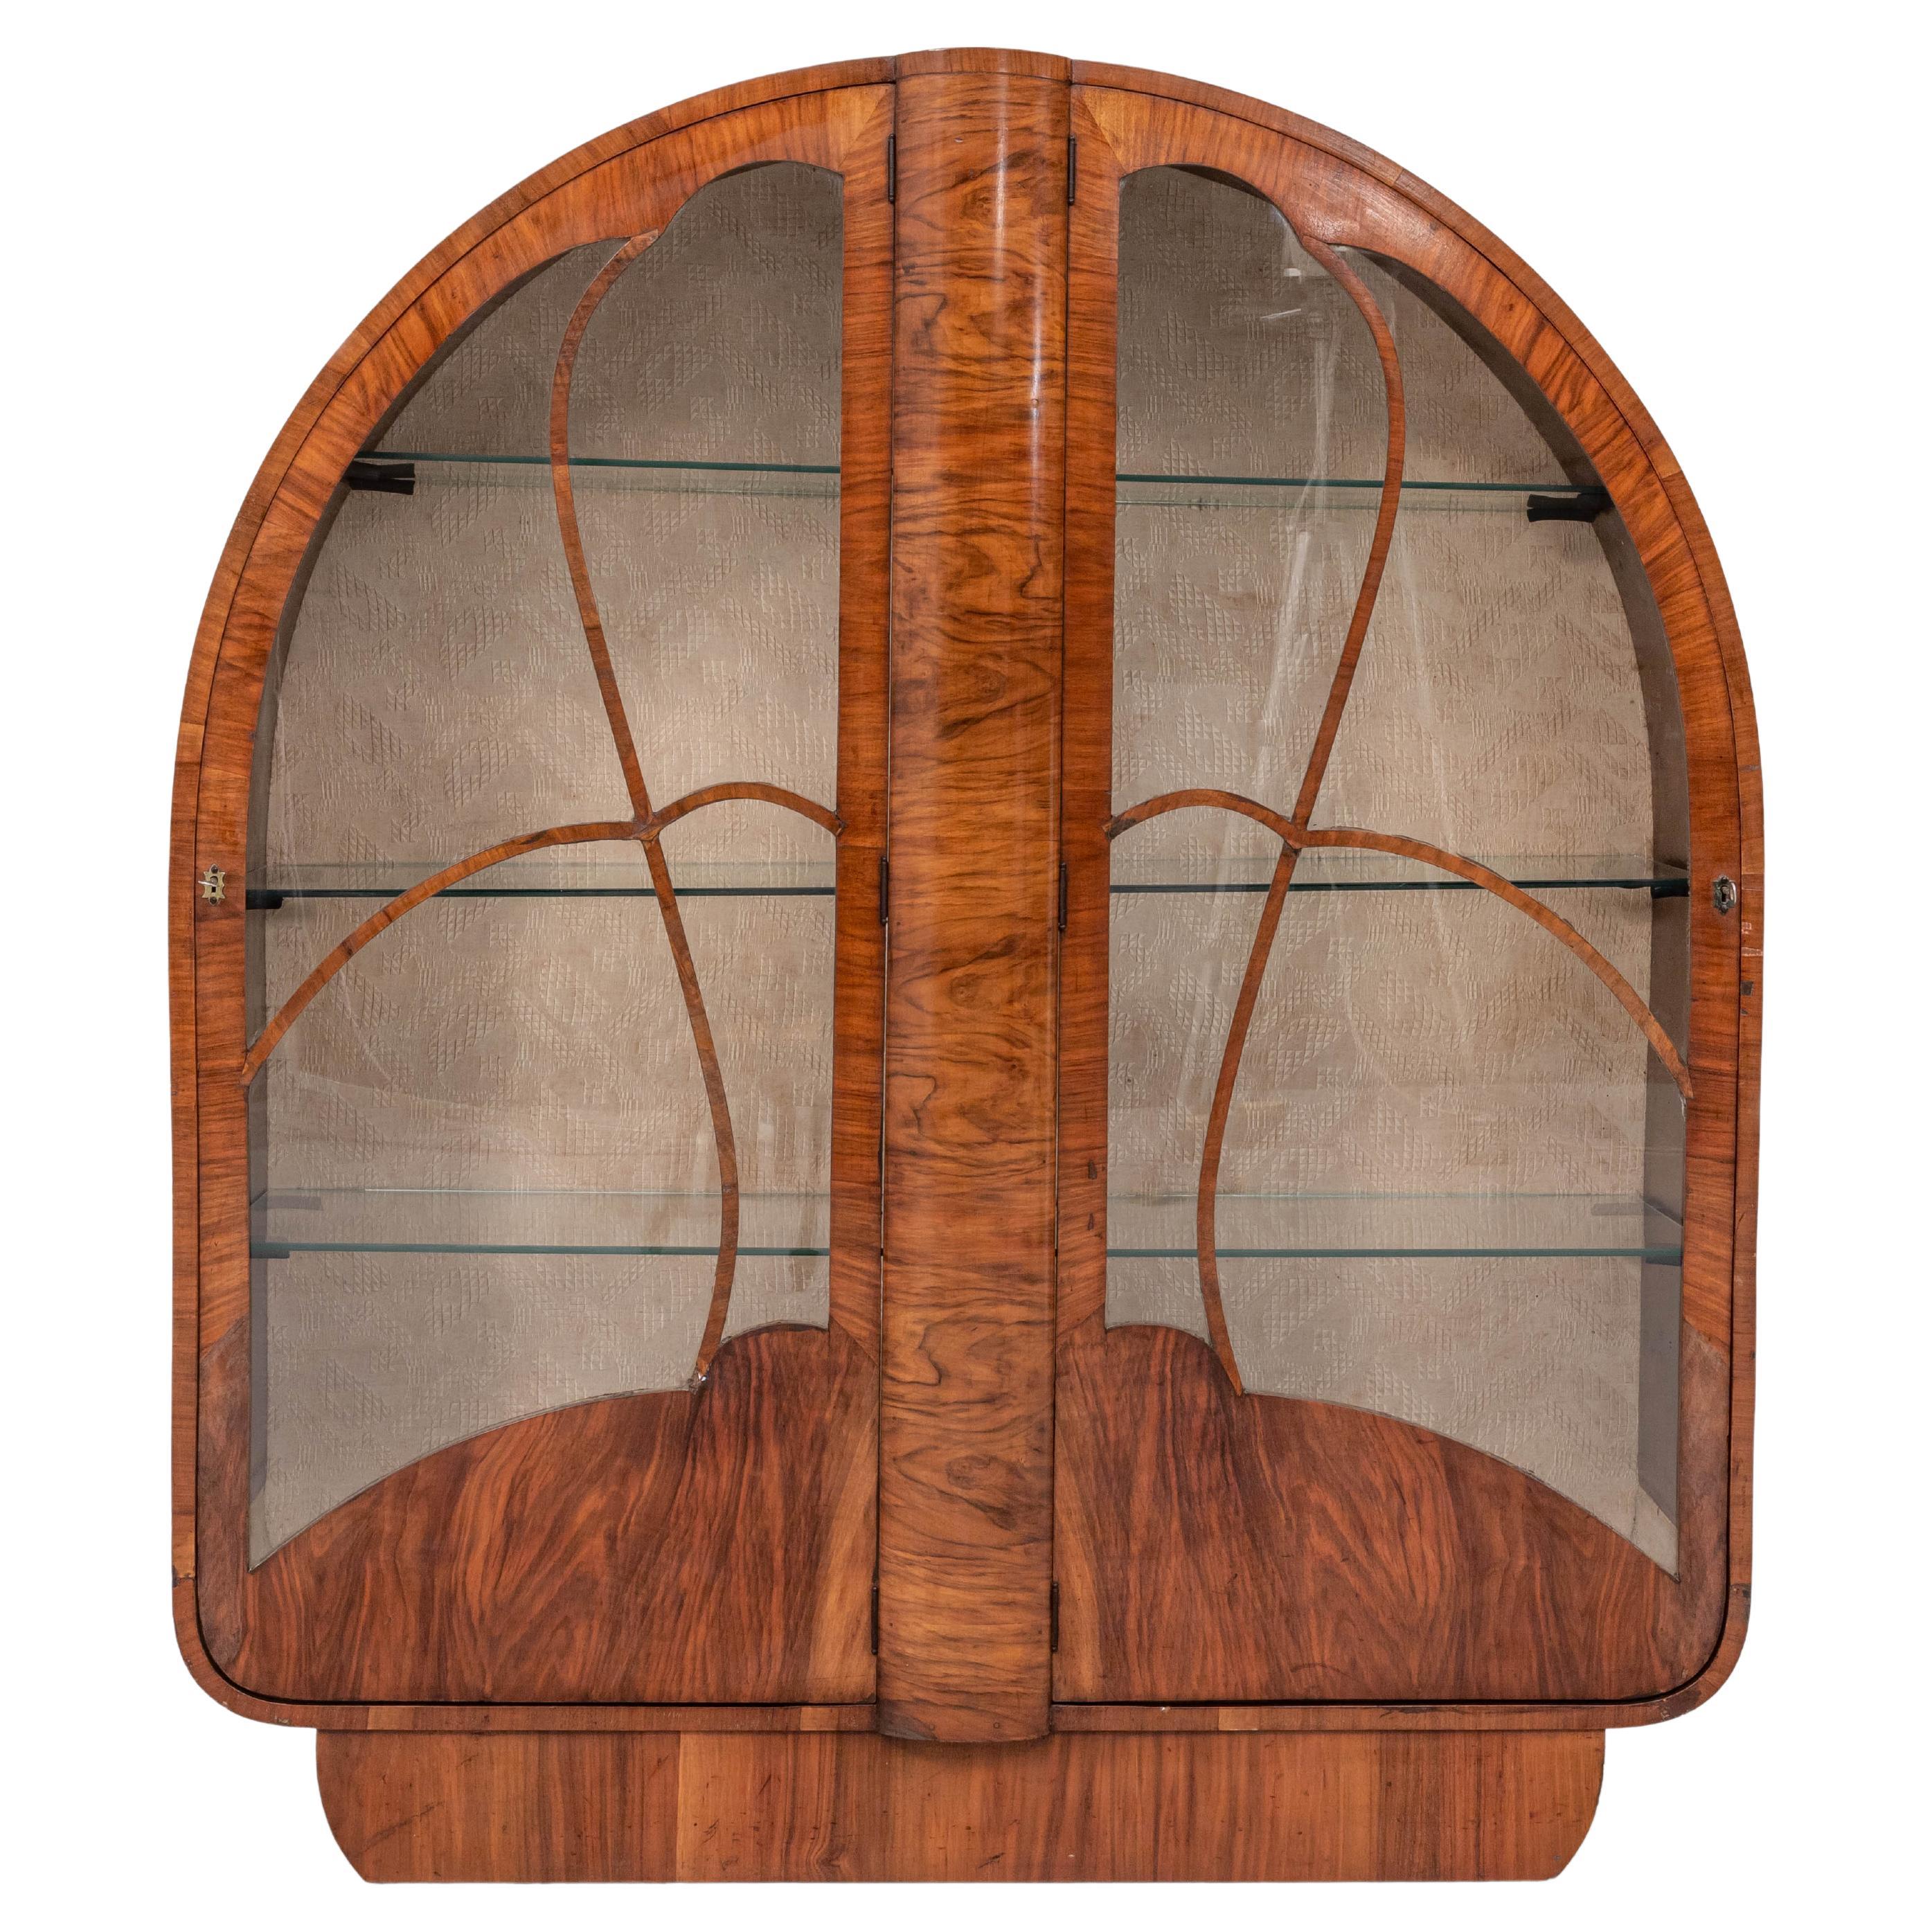 Graceful Art Deco Cabinet in Walnut and Glass, France, 1920